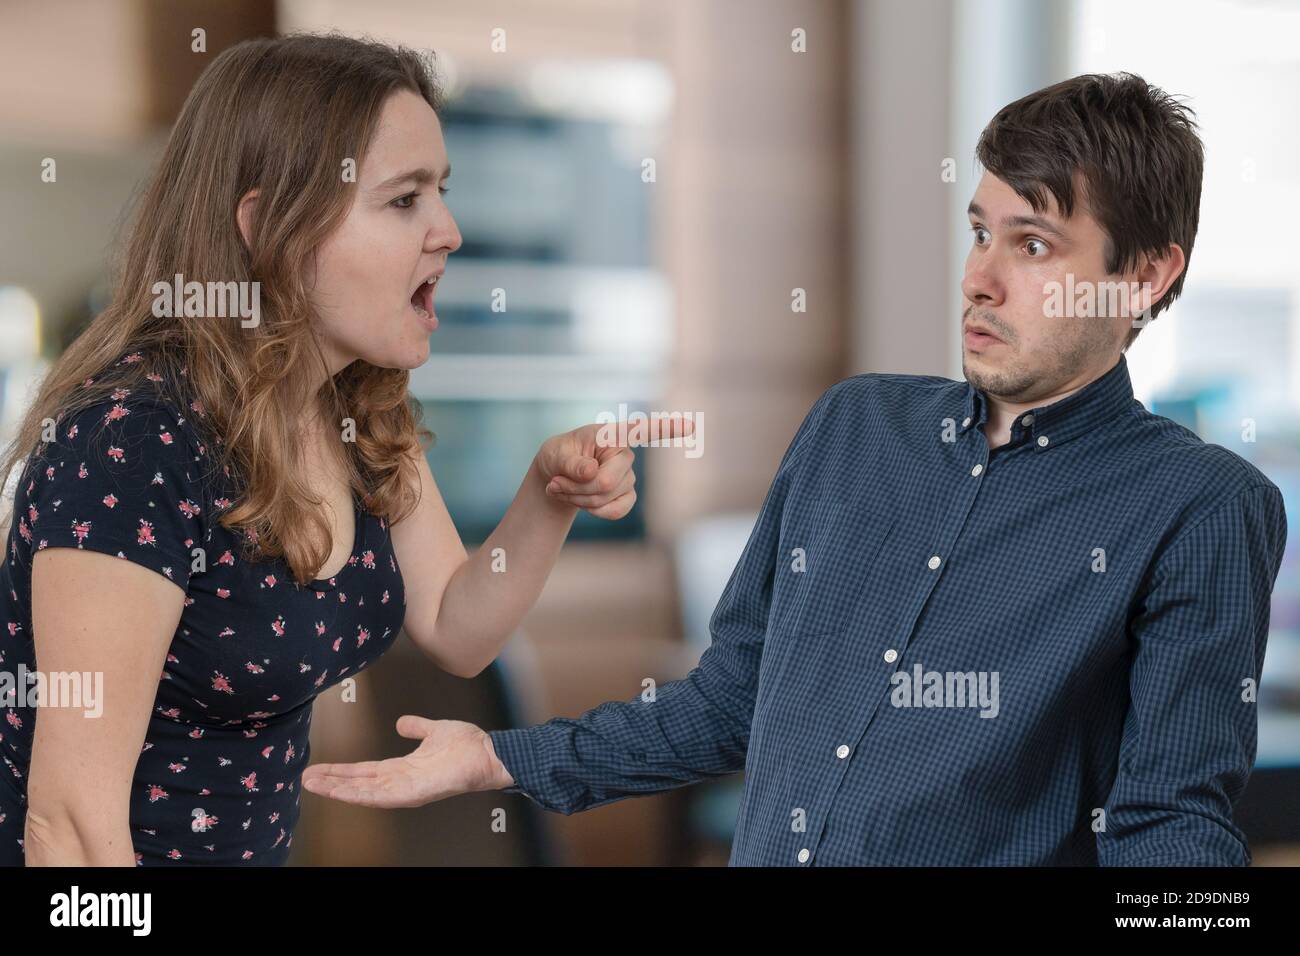 Jealousy hysterical wife is shouting and blaming her husband. Stock Photo